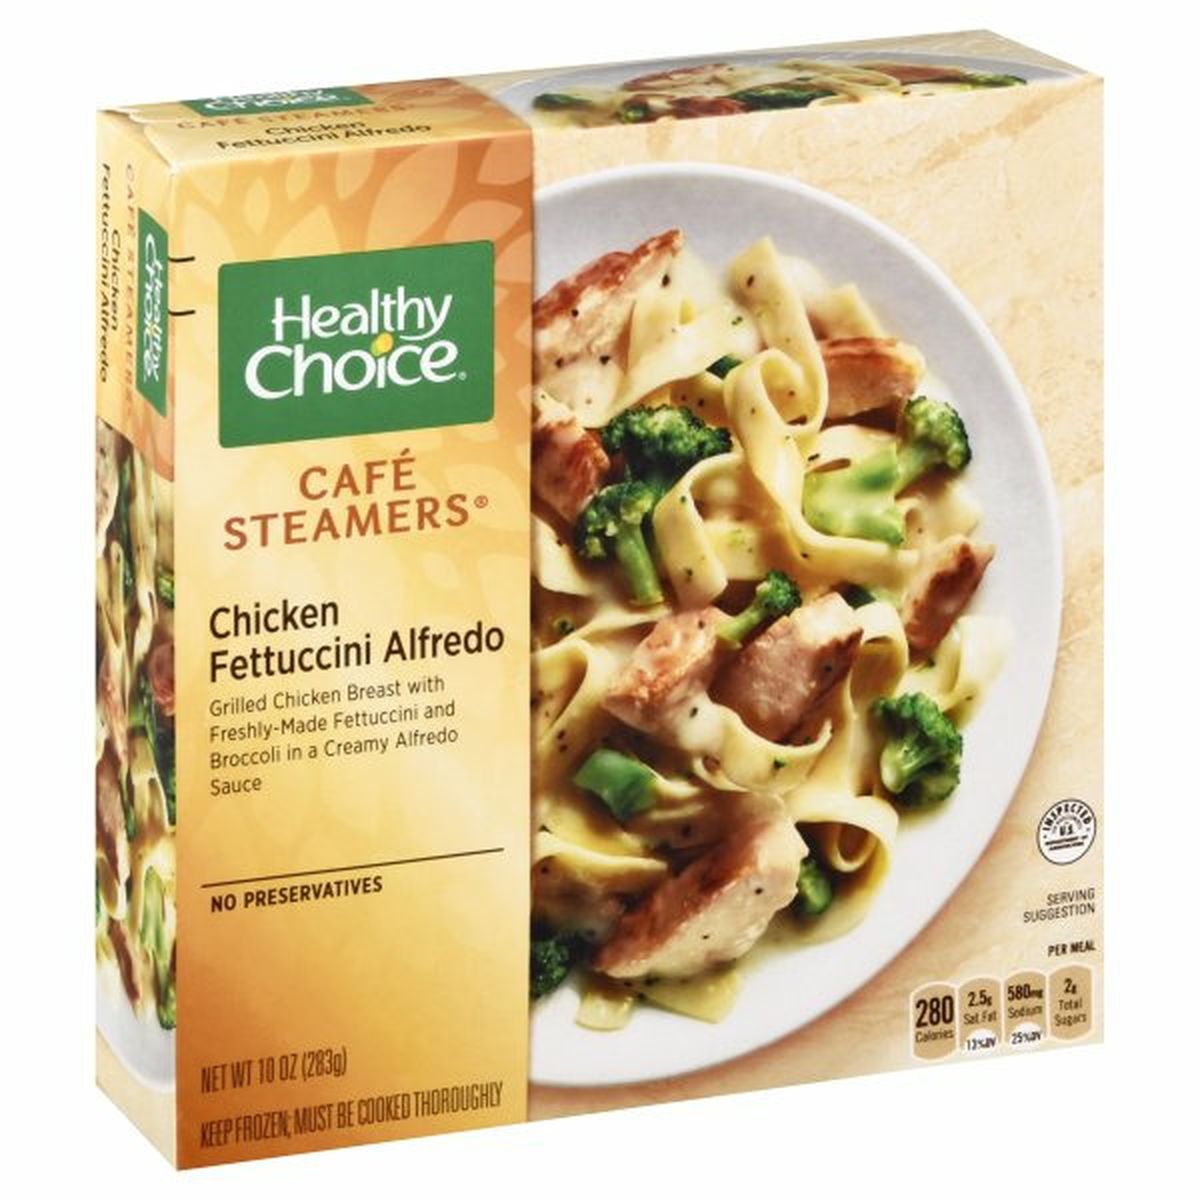 Calories in Healthy Choice Cafe Steamers Chicken Fettuccini Alfredo